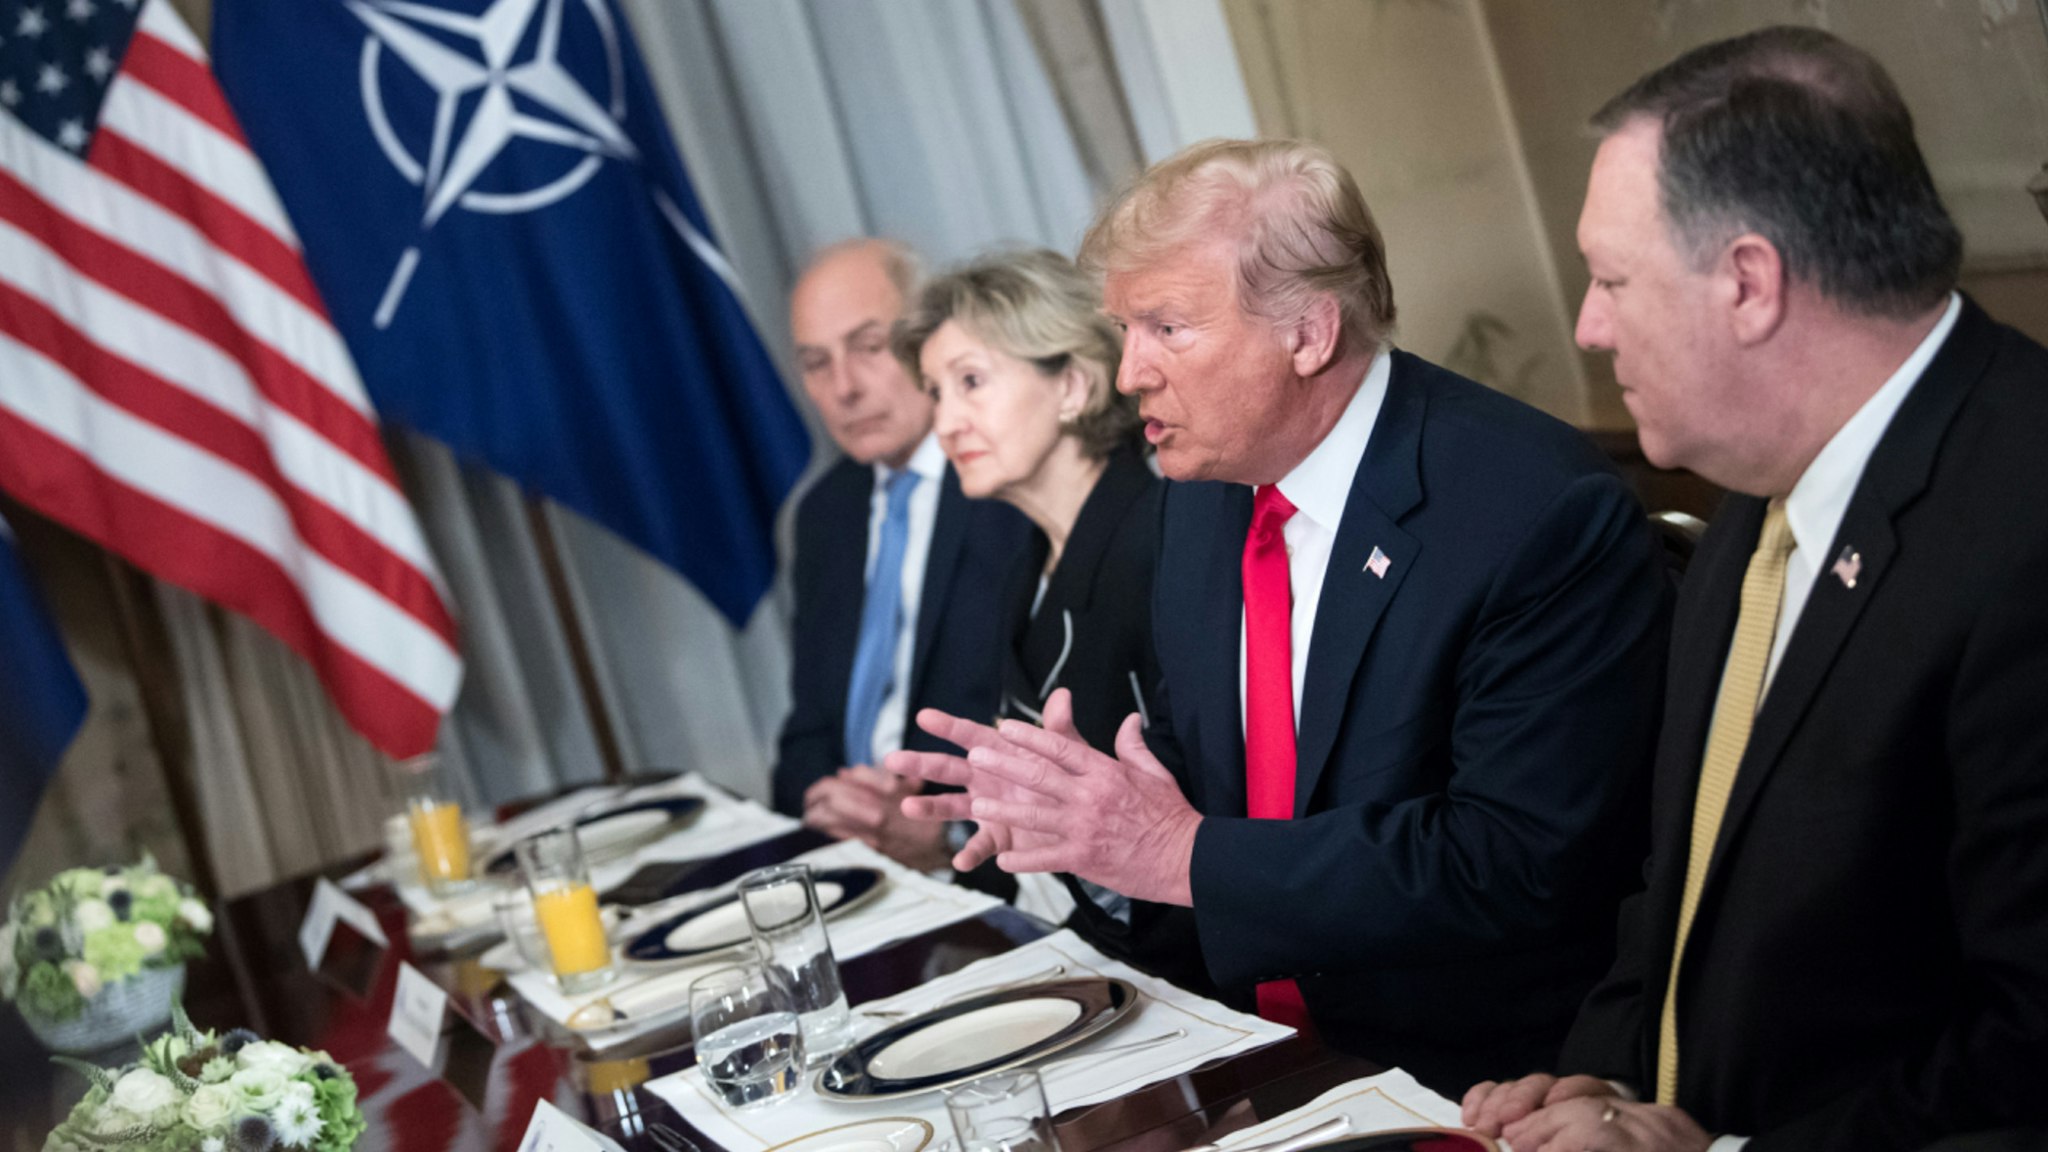 11 July 2018, Brussels, Belgium: Donald Trump, President of the United States of America, speaks with NATO Secretary General Stoltenberg at the Brussel residence of the American Ambassador during the NATO Summit.